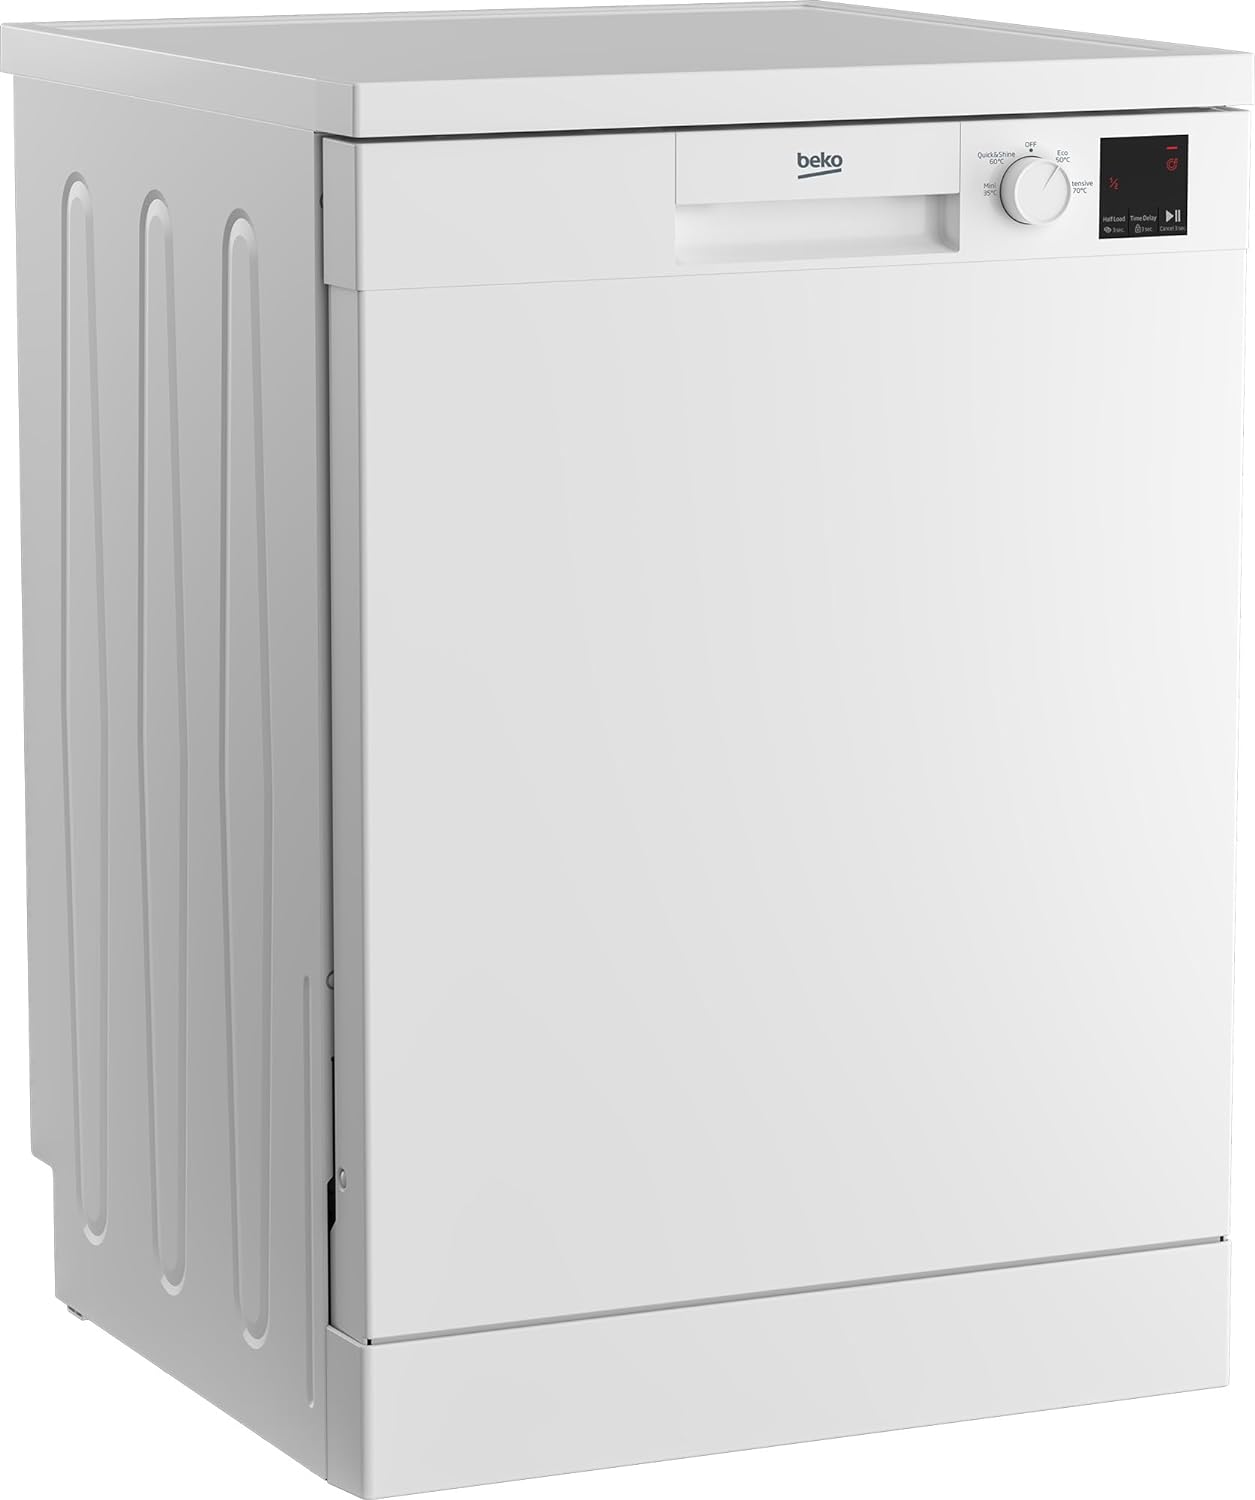 Beko DVN04320W Freestanding Dishwasher | 60 cm Full size with 13 Place Setting | x30 Minute Quick Wash Technology